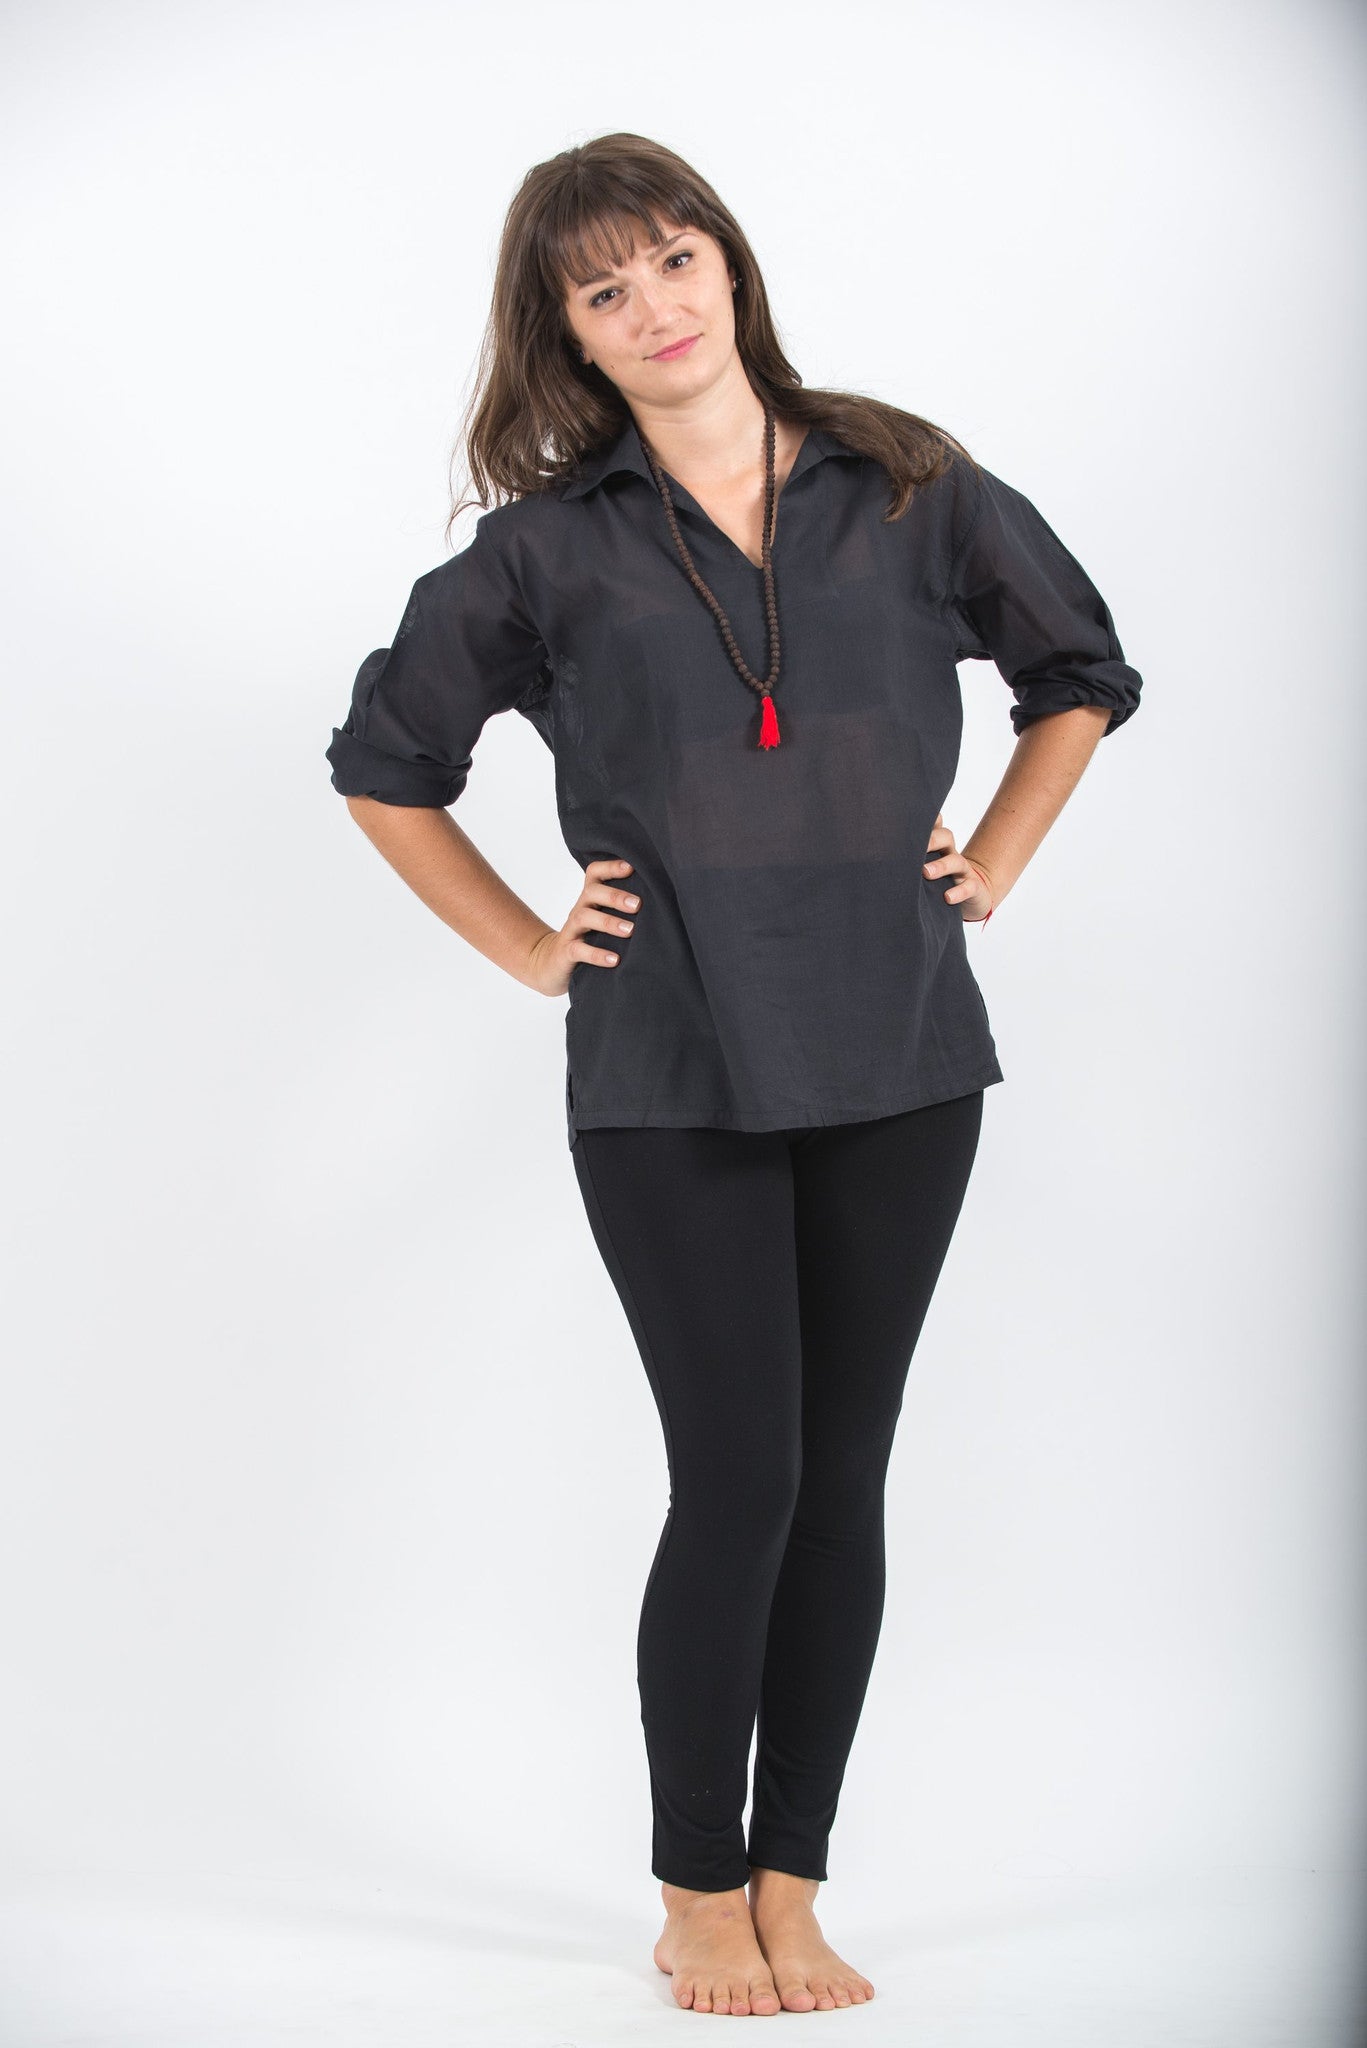 Womens Yoga Shirts No Collar with Coconut Buttons in Black – Harem